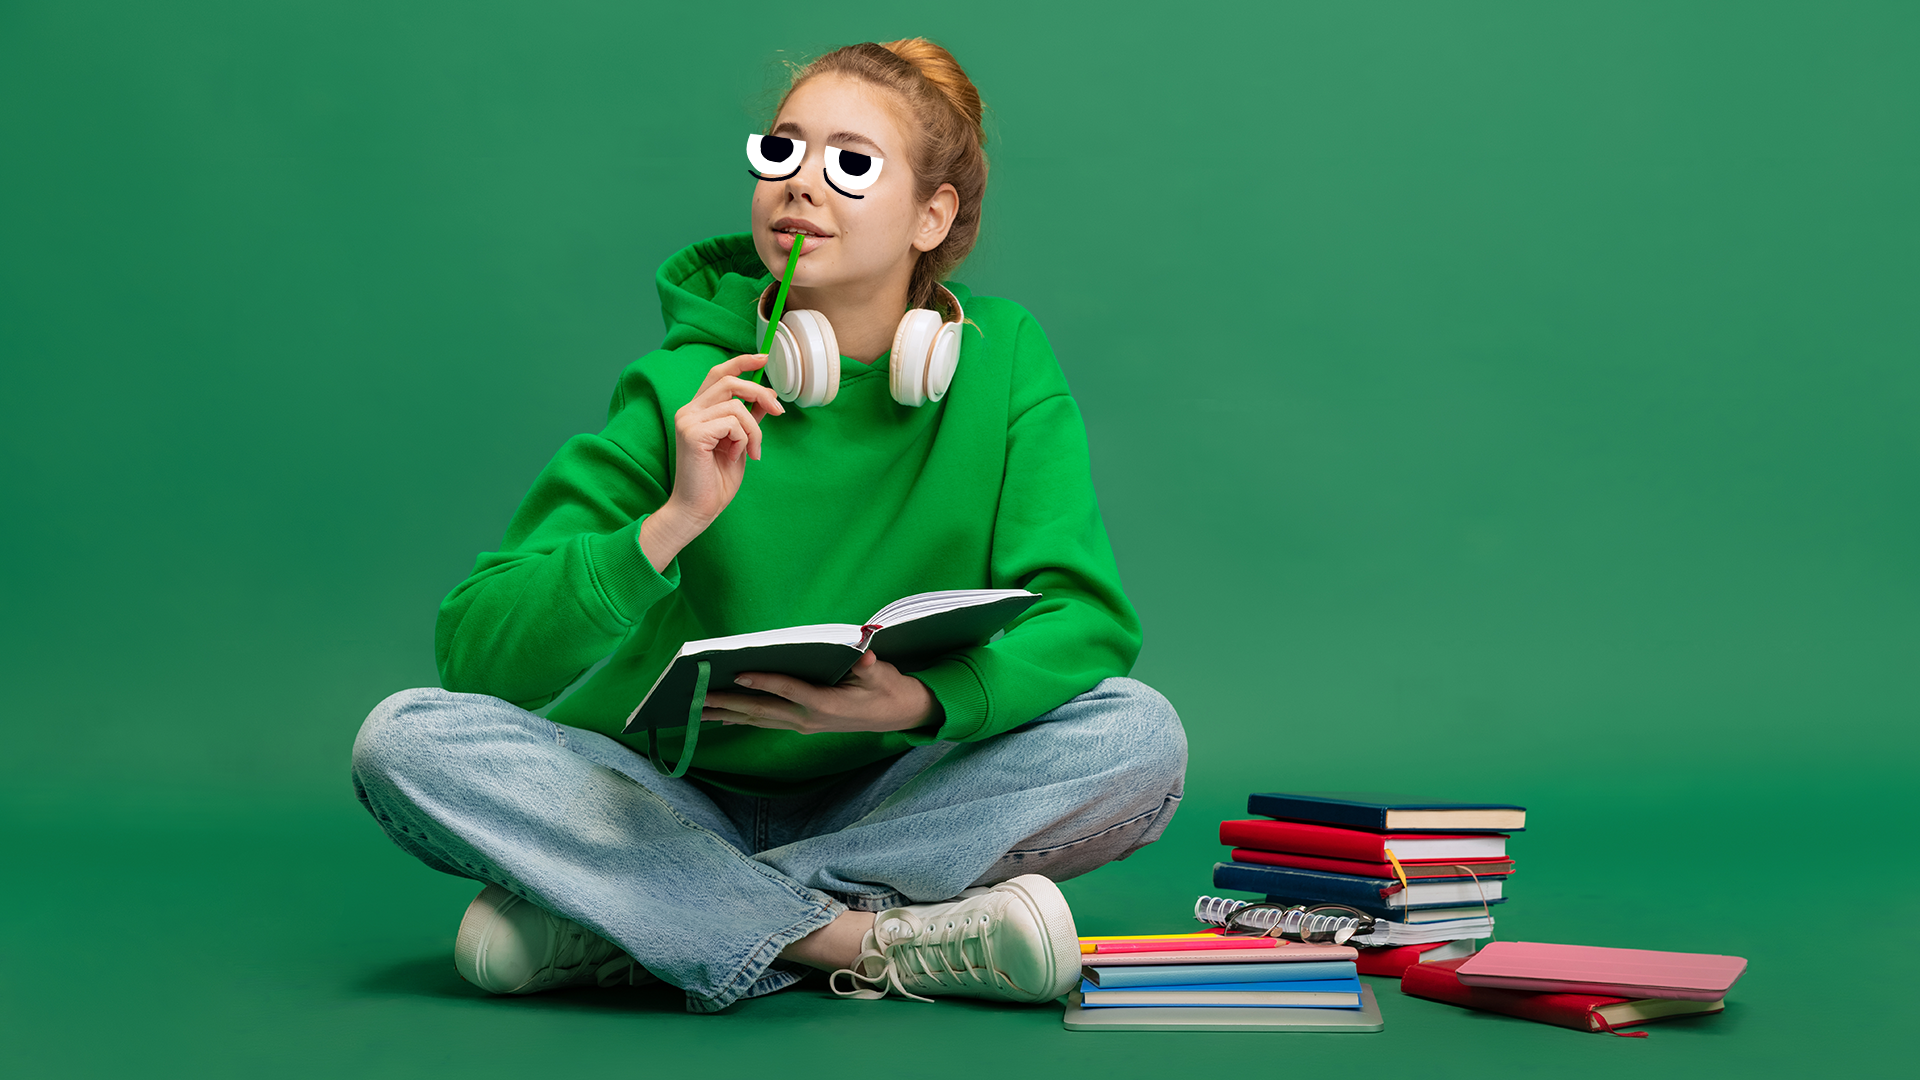 A girl in a green hoodie reading books